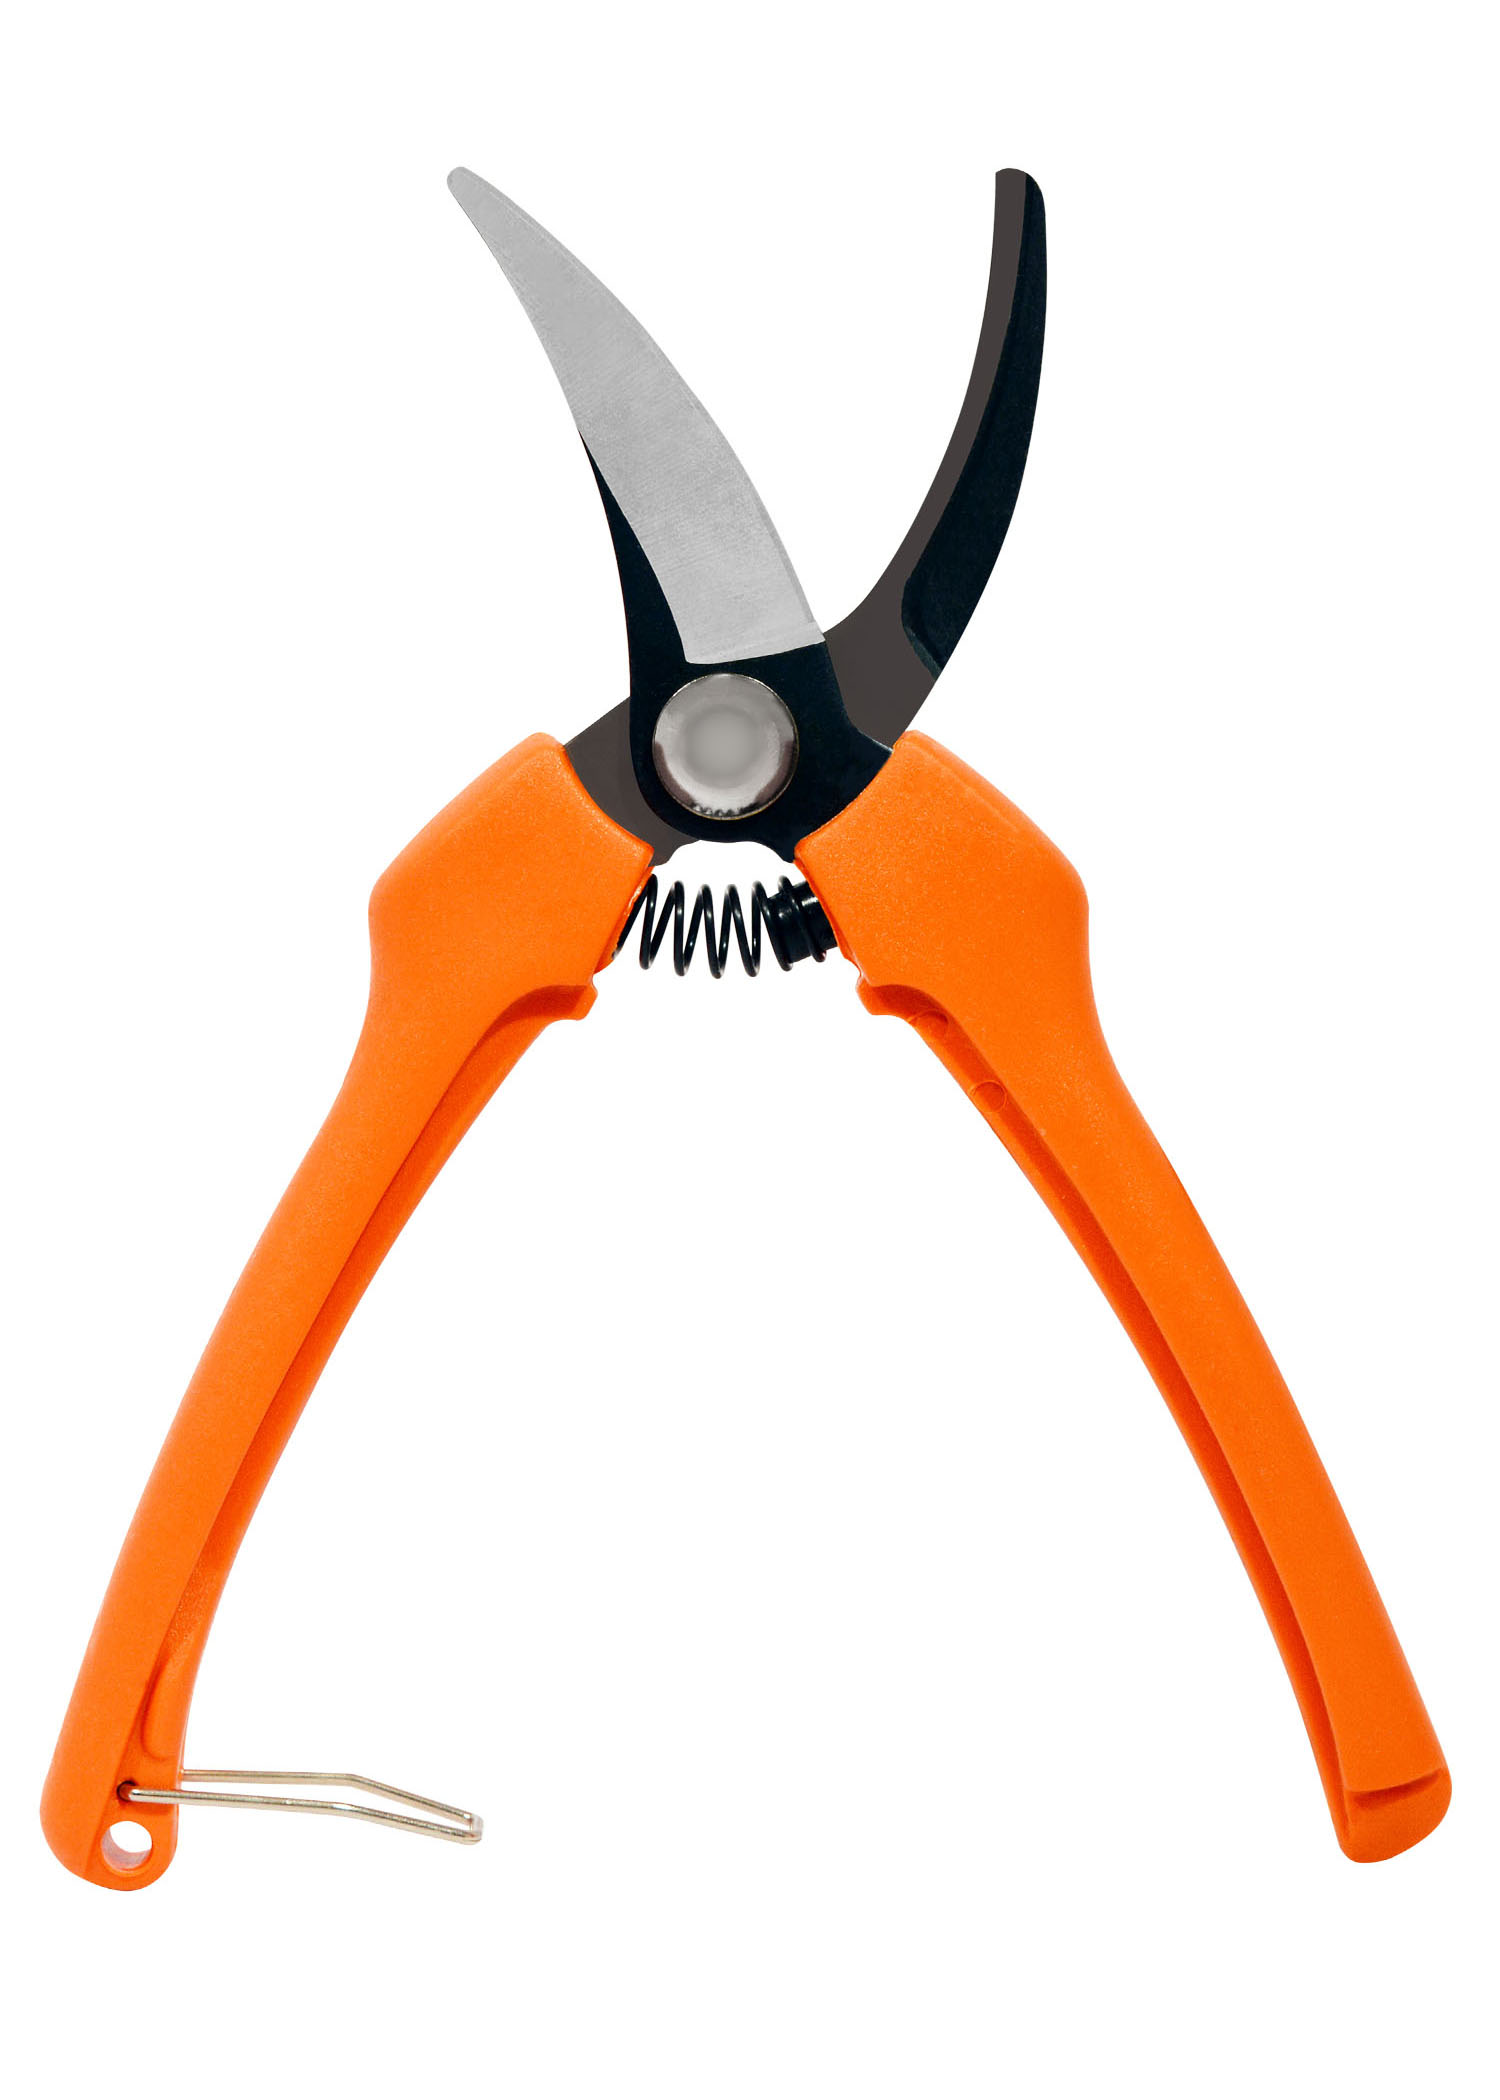 Bypass Snips, 7.5-Inch H307